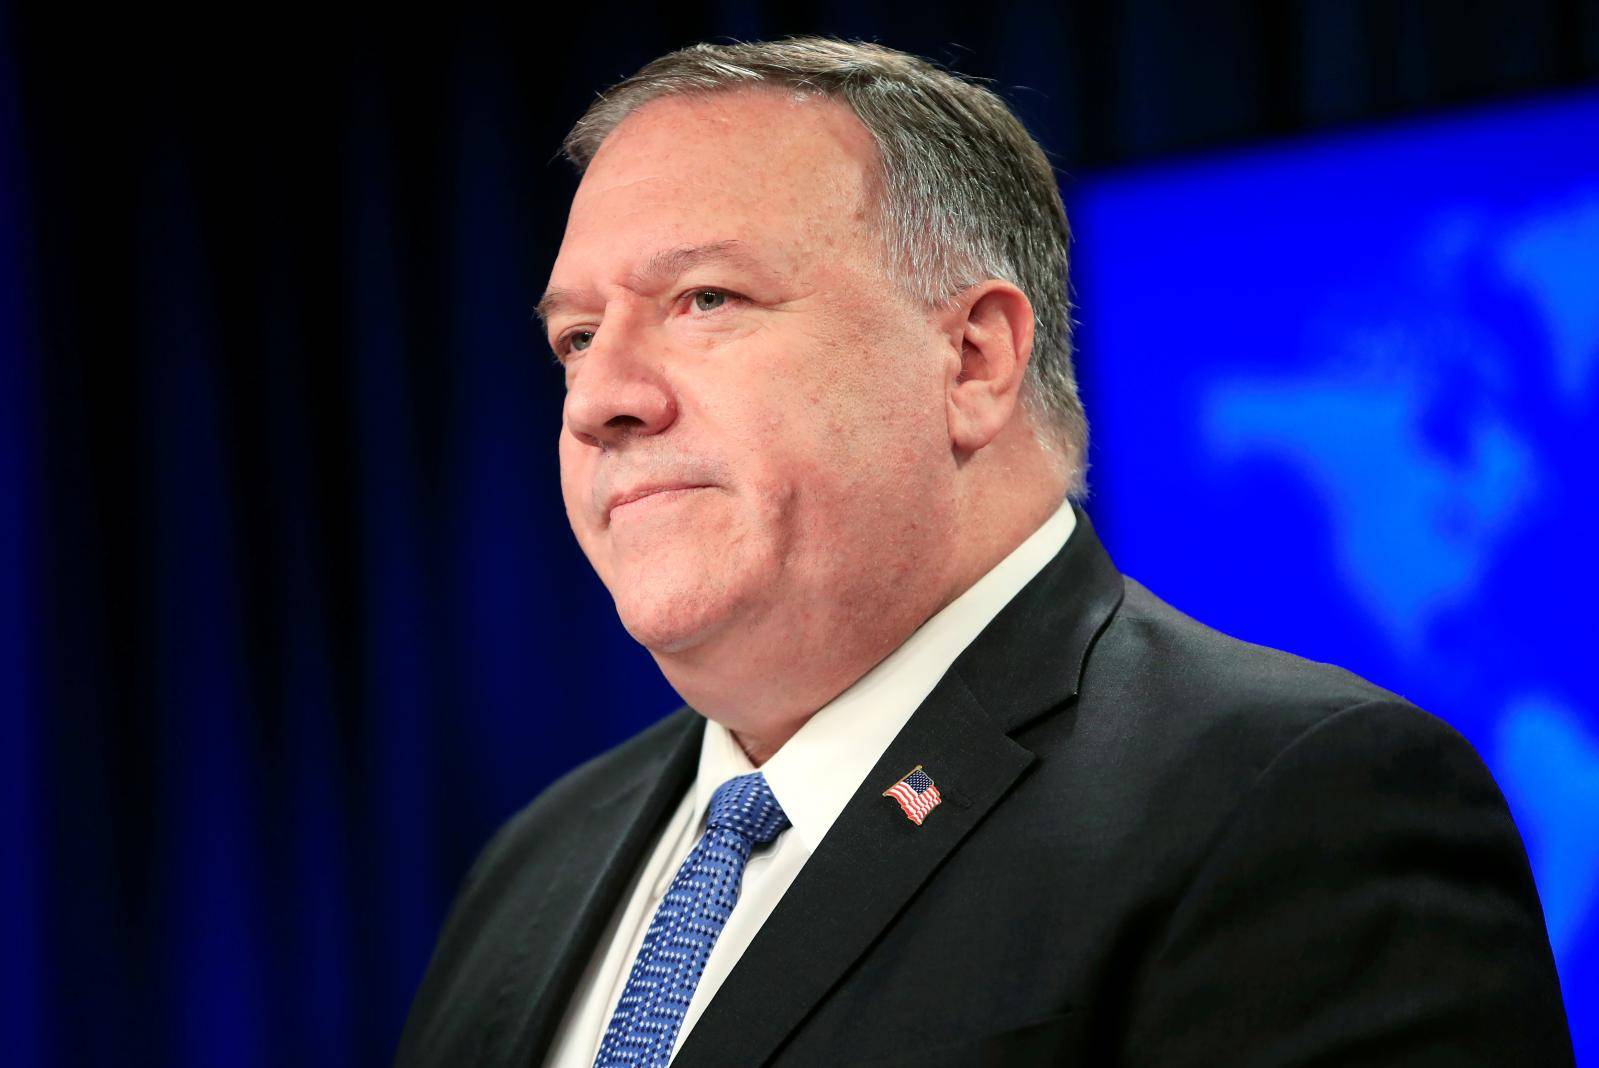 U.S. Secretary of State Pompeo attends a news conference in Washington